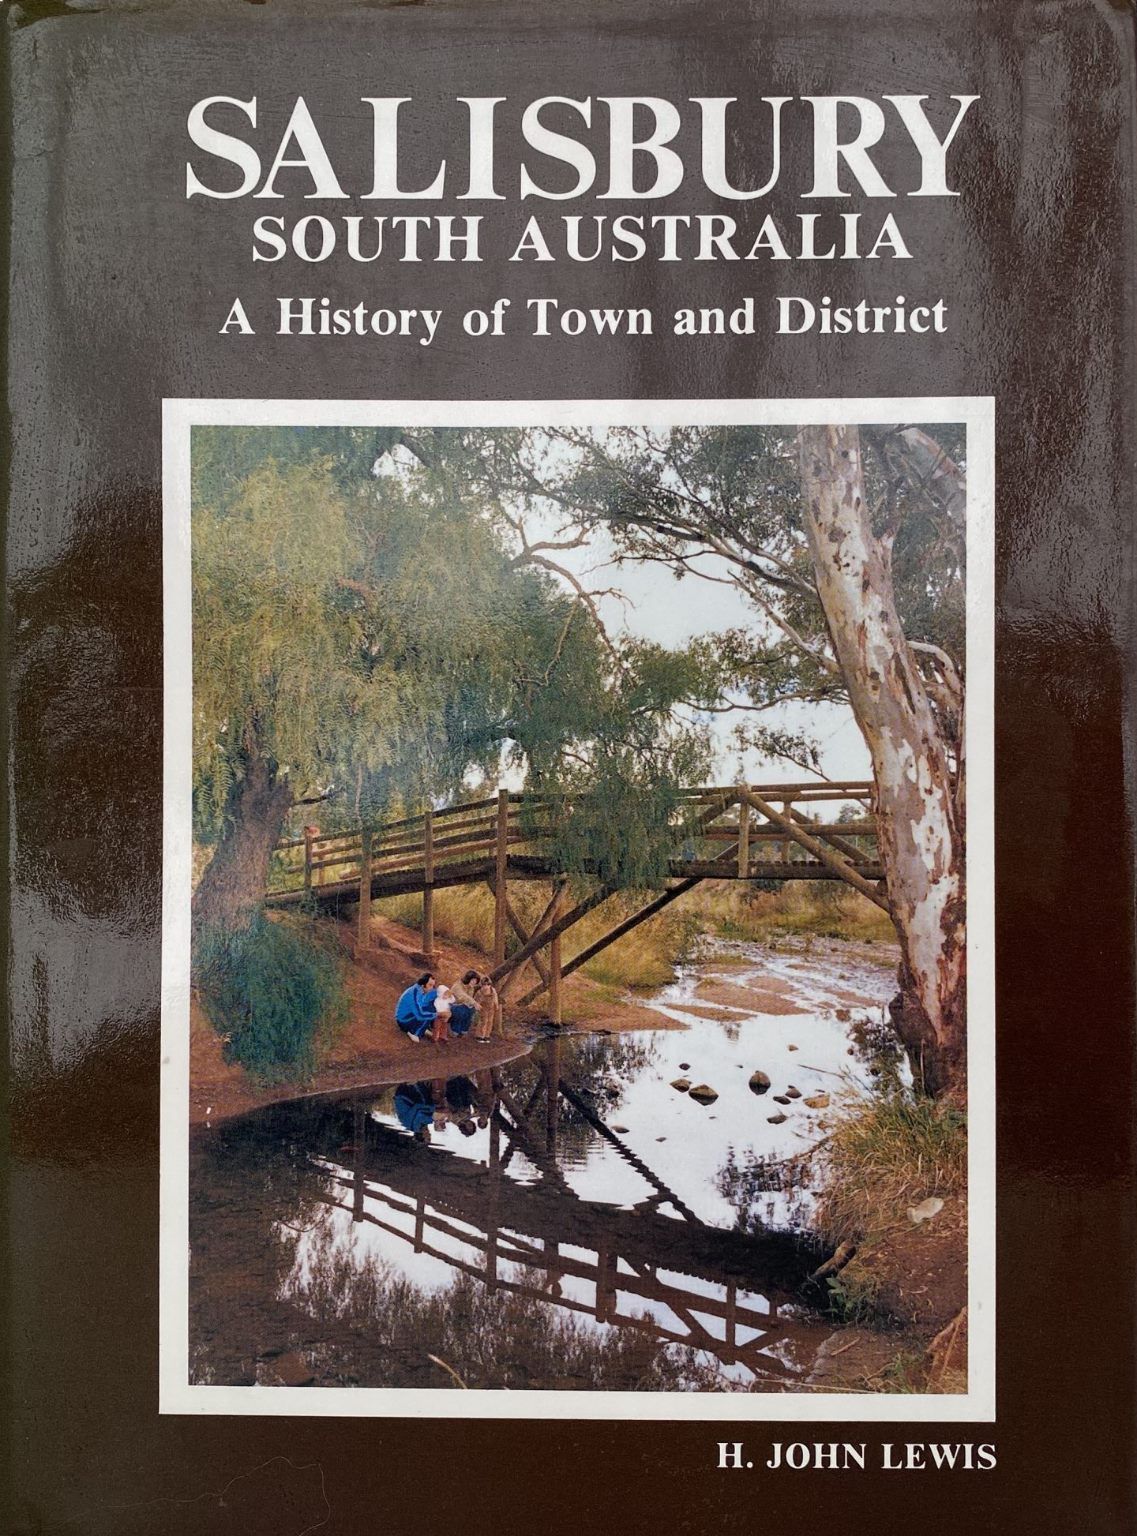 SALISBURY SOUTH AUSTRALIA: A History of Town and District